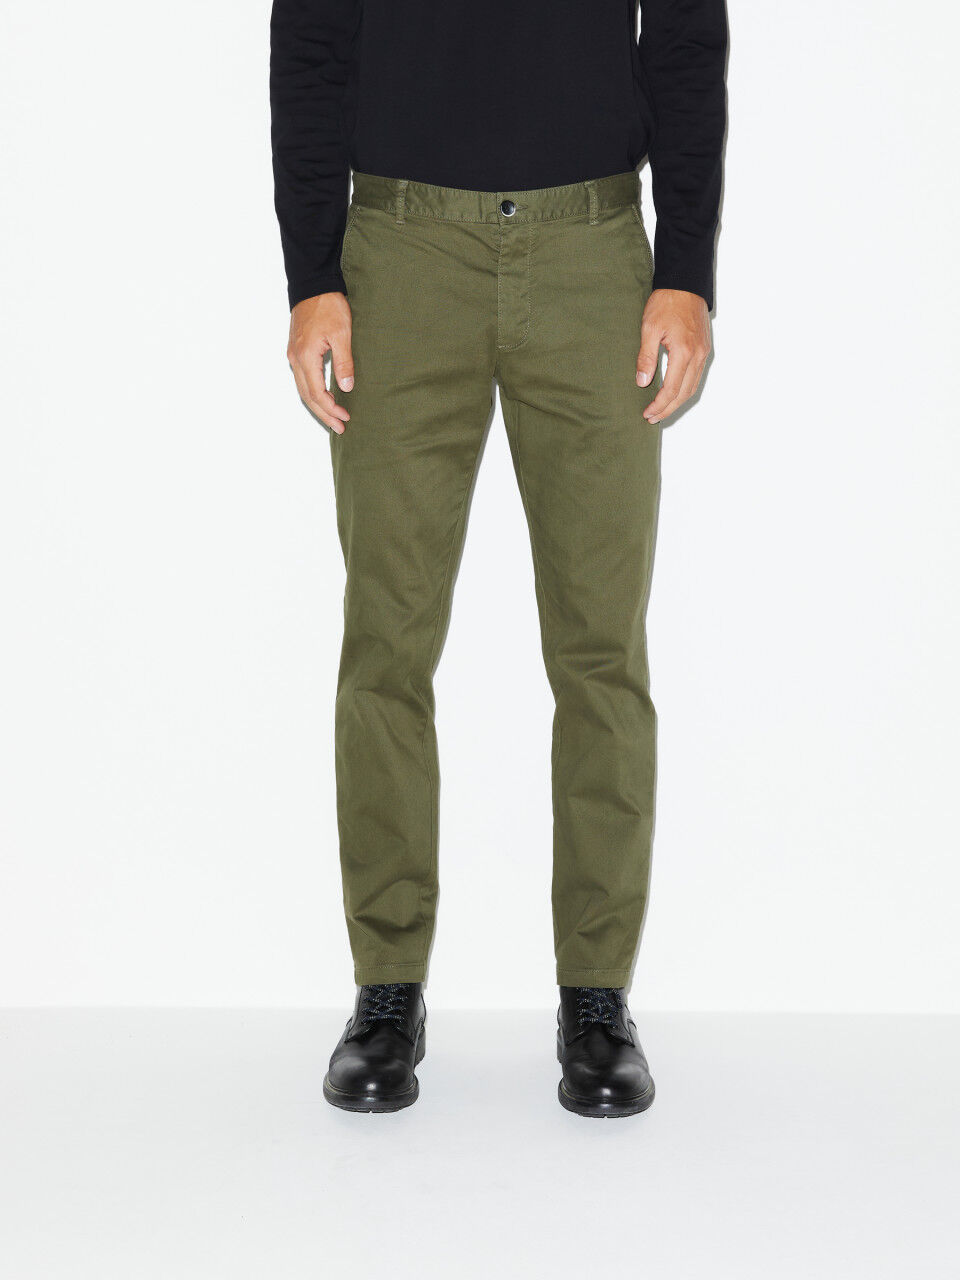 Men's Shorts and Trousers 2022 Collection | Sisley World